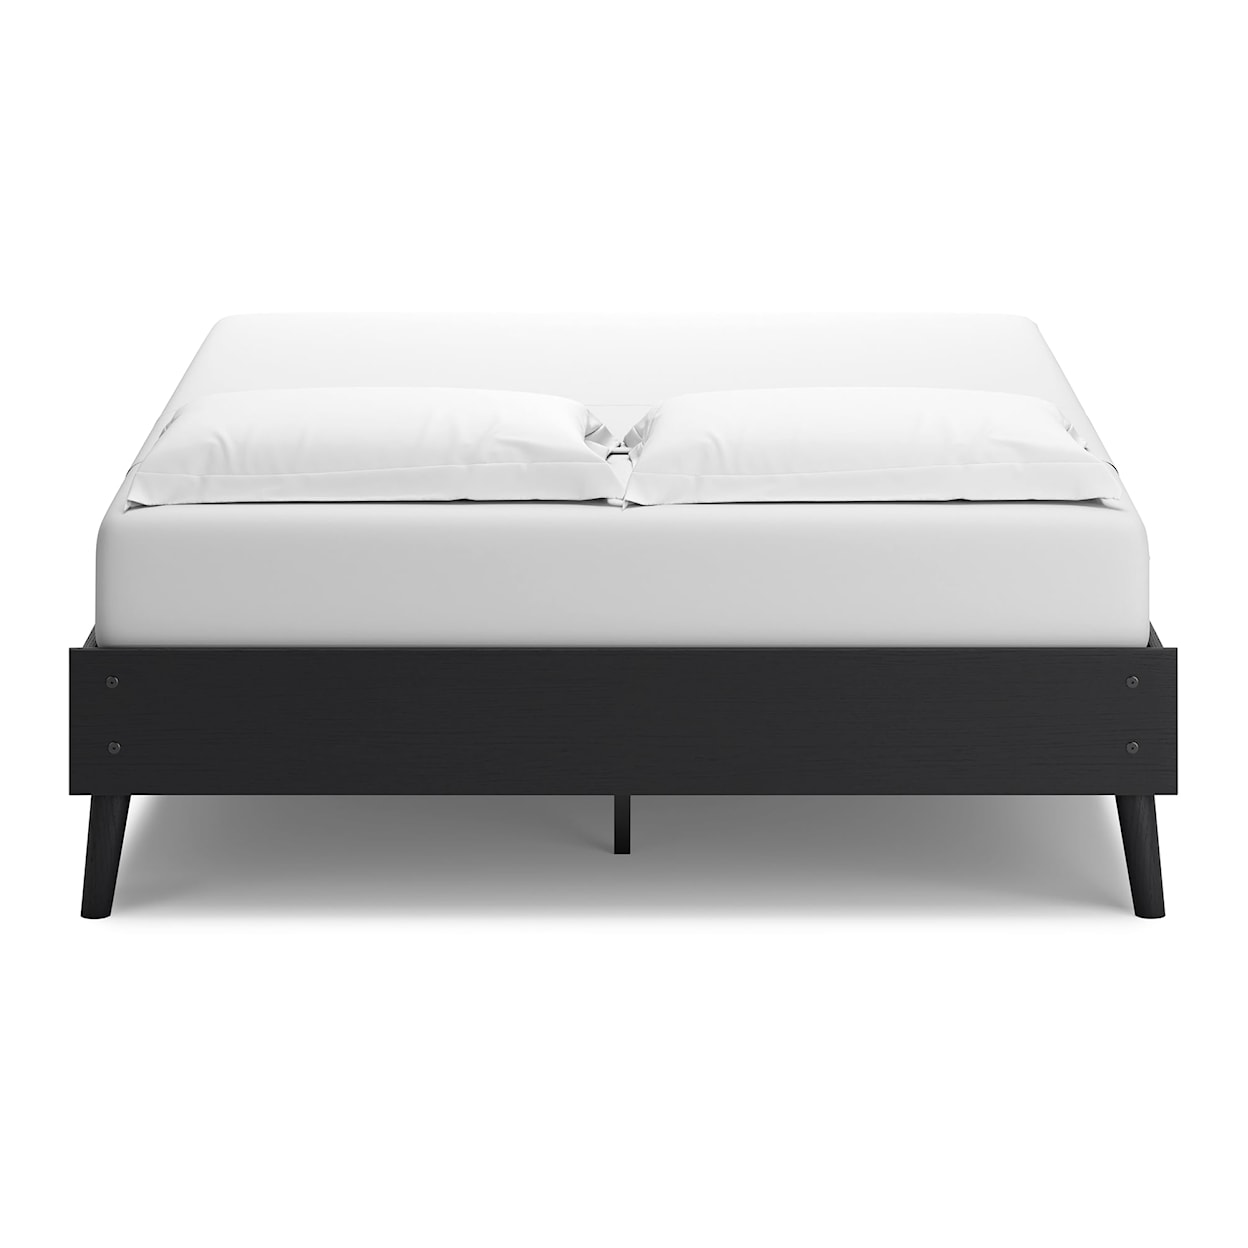 Signature Design by Ashley Furniture Charlang Queen Platform Bed